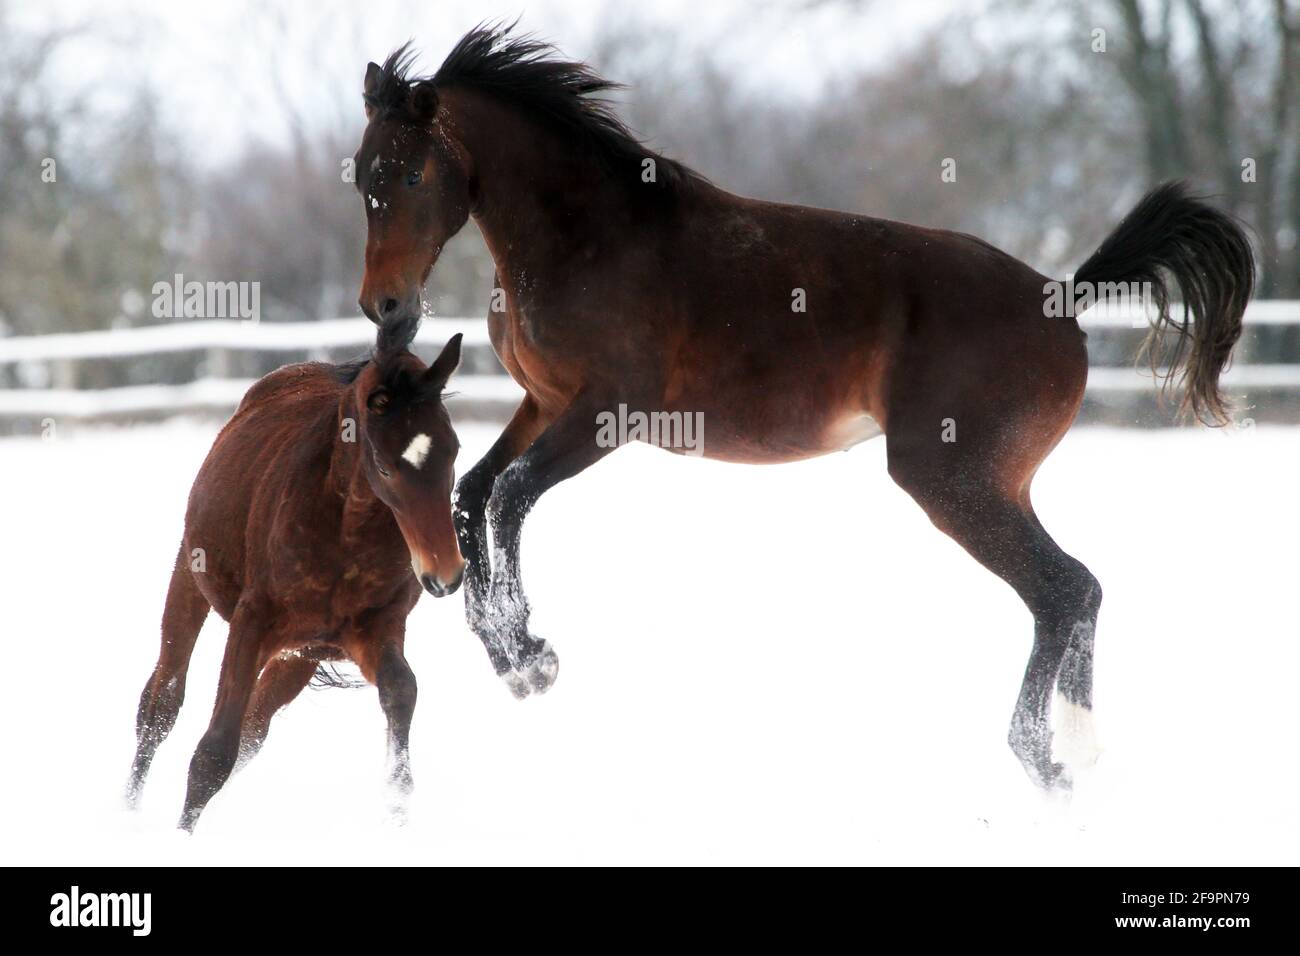 12.02.2021, Graditz, Saxony, Germany - Horses romping in a snow-covered paddock in winter. 00S210212D633CAROEX.JPG [MODEL RELEASE: NO, PROPERTY RELEAS Stock Photo